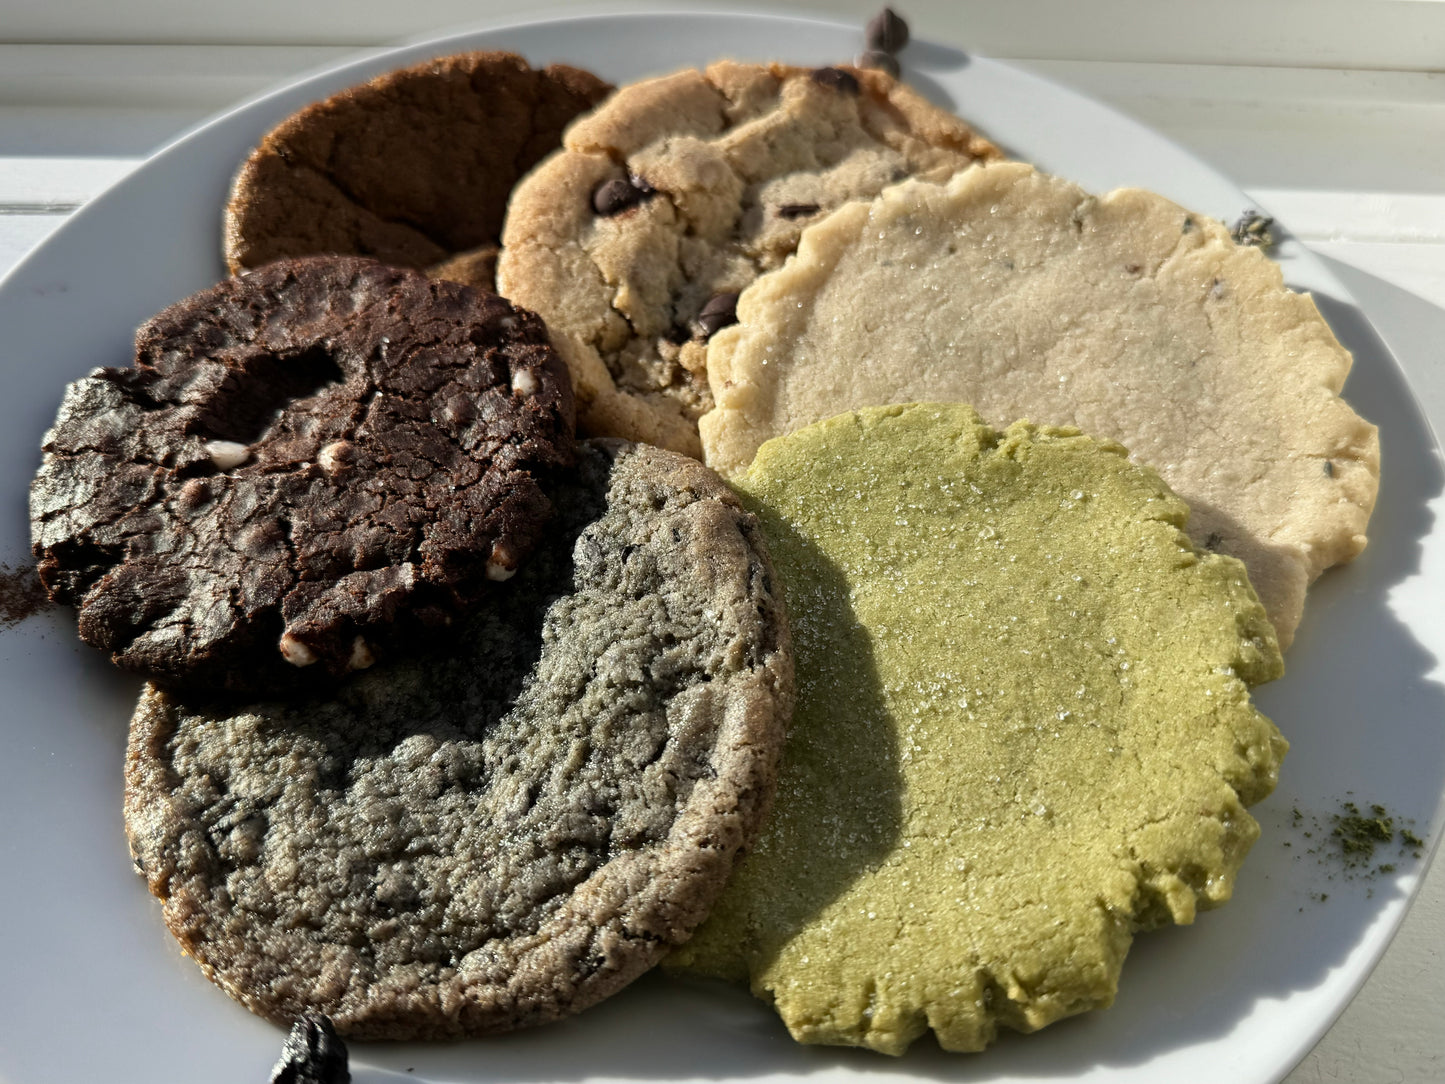 Cocoa's Full - 12 Cookies (Choose up to 4 flavors)